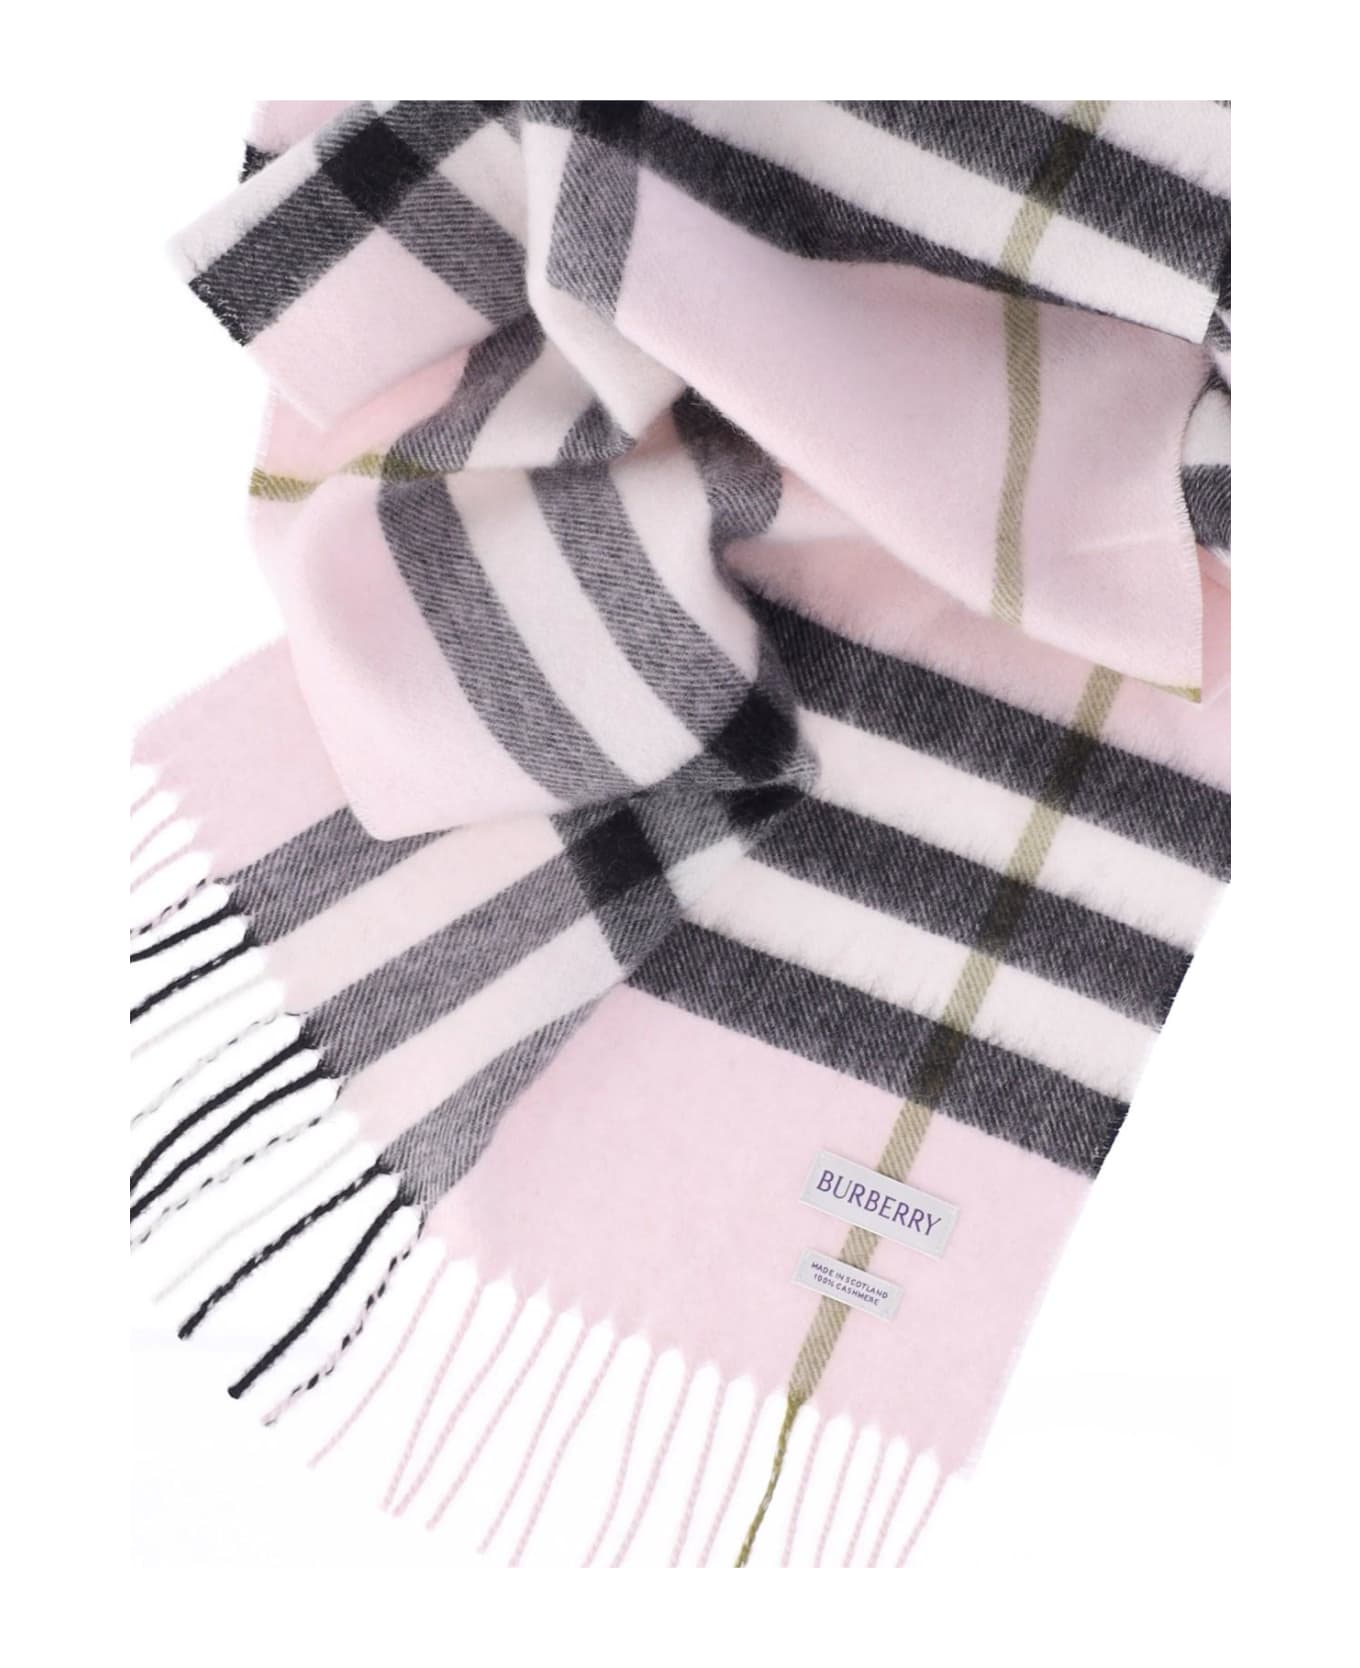 Burberry 'check' Scarf - Pale Candy Pink スカーフ